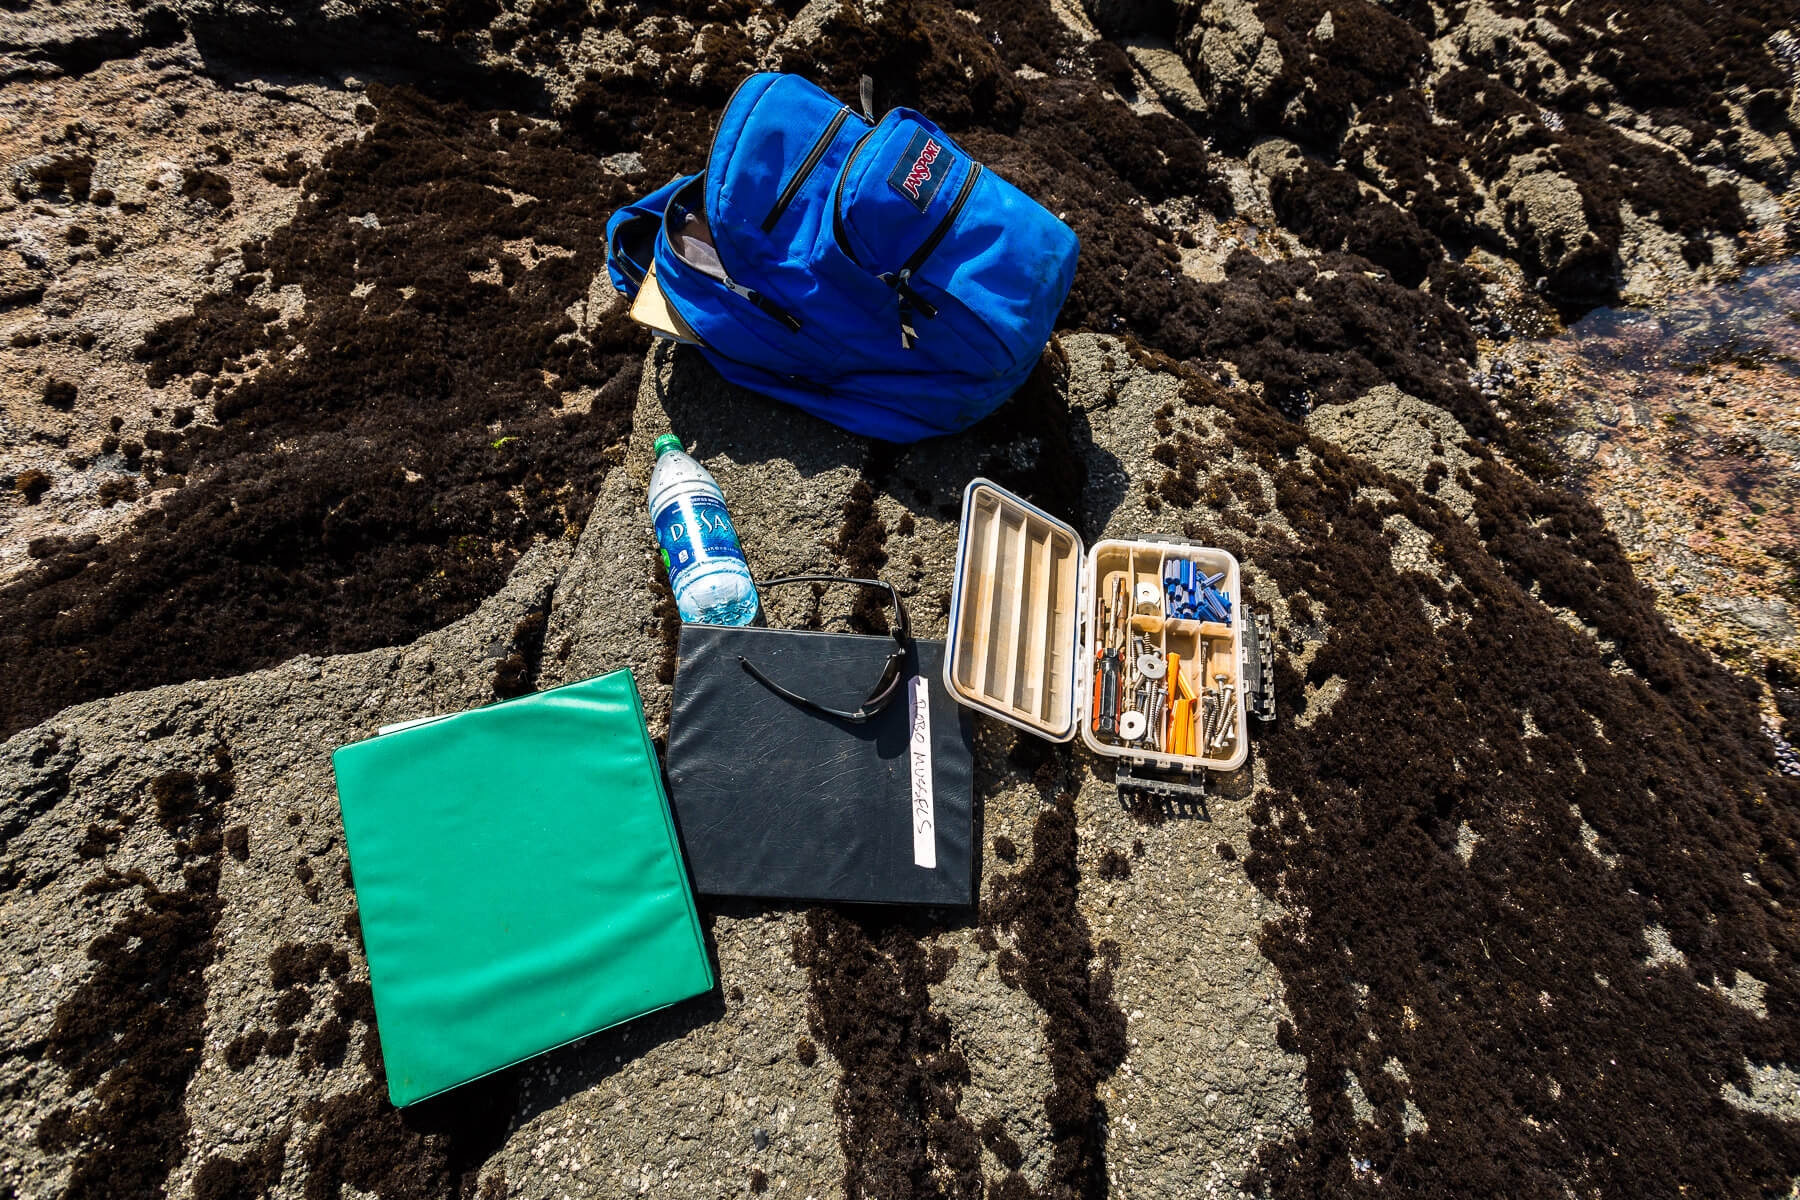 researcher toolkit items scattered on the beach